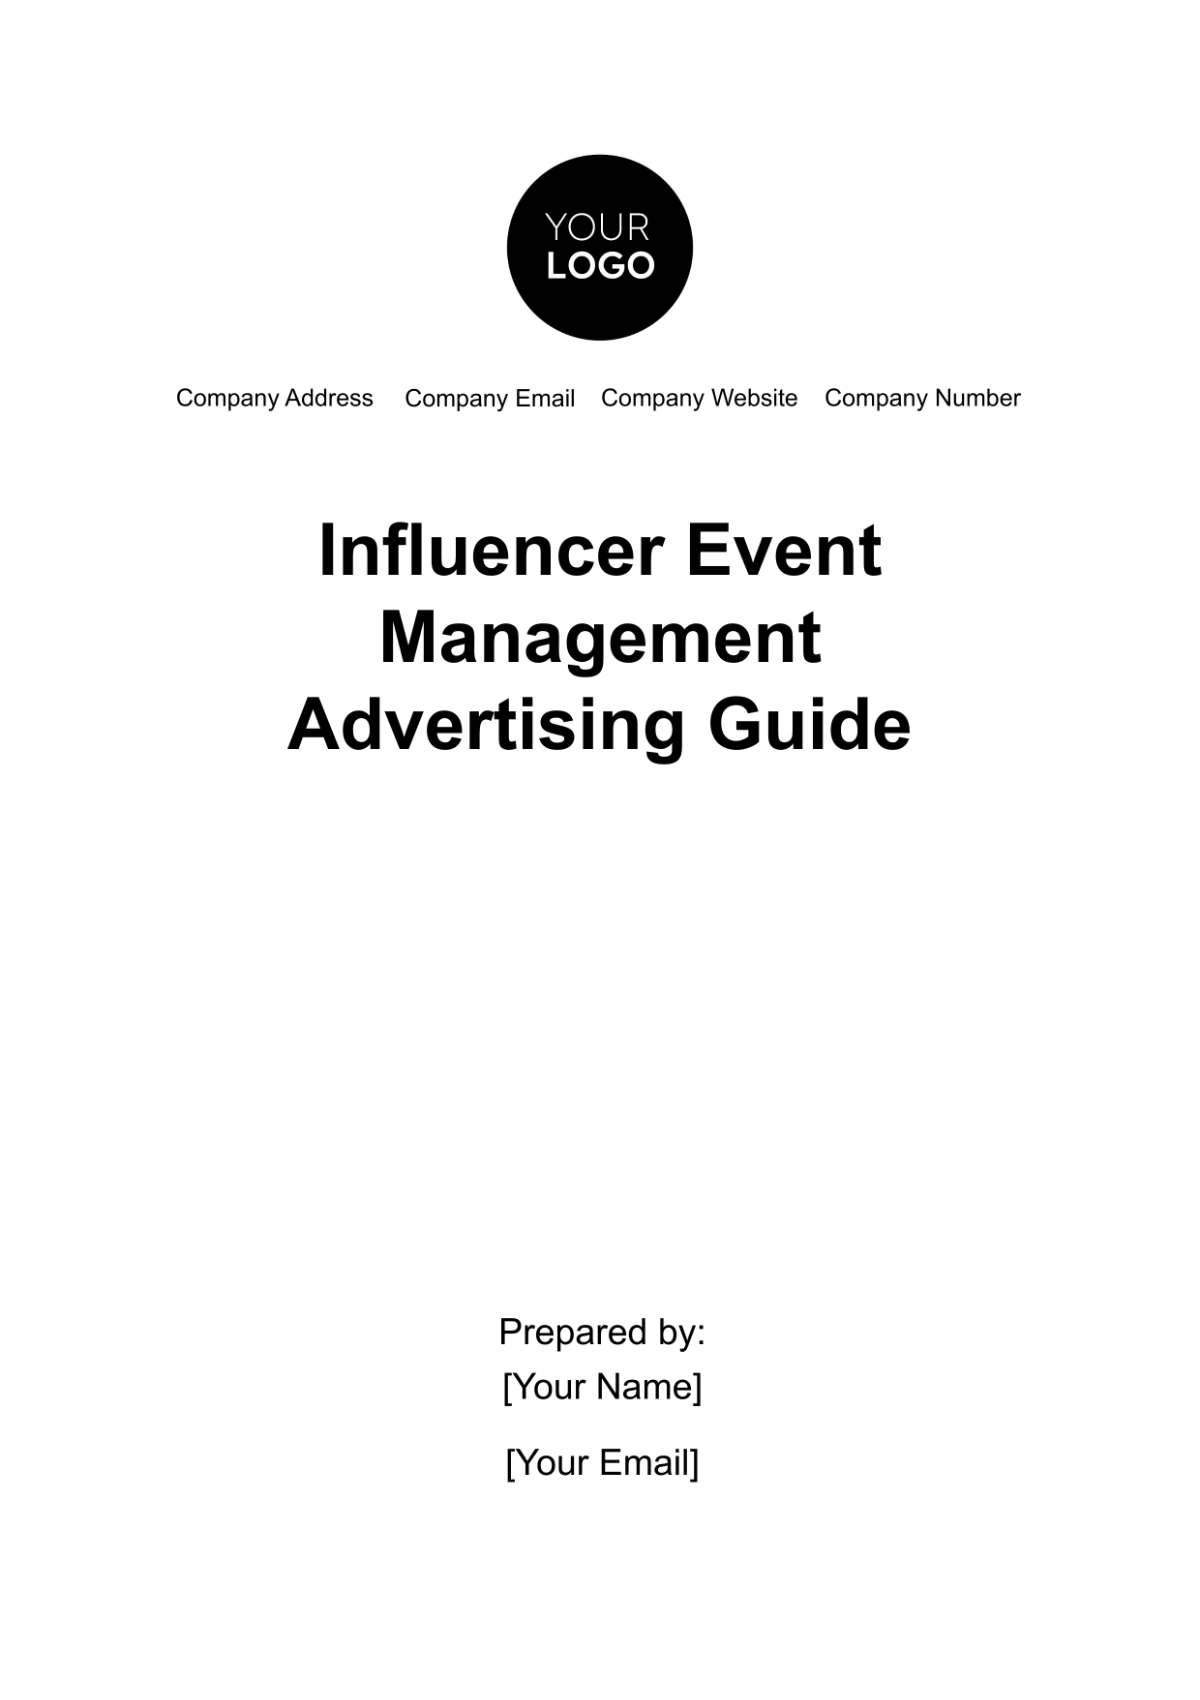 Influencer Event Management Advertising Guide Template